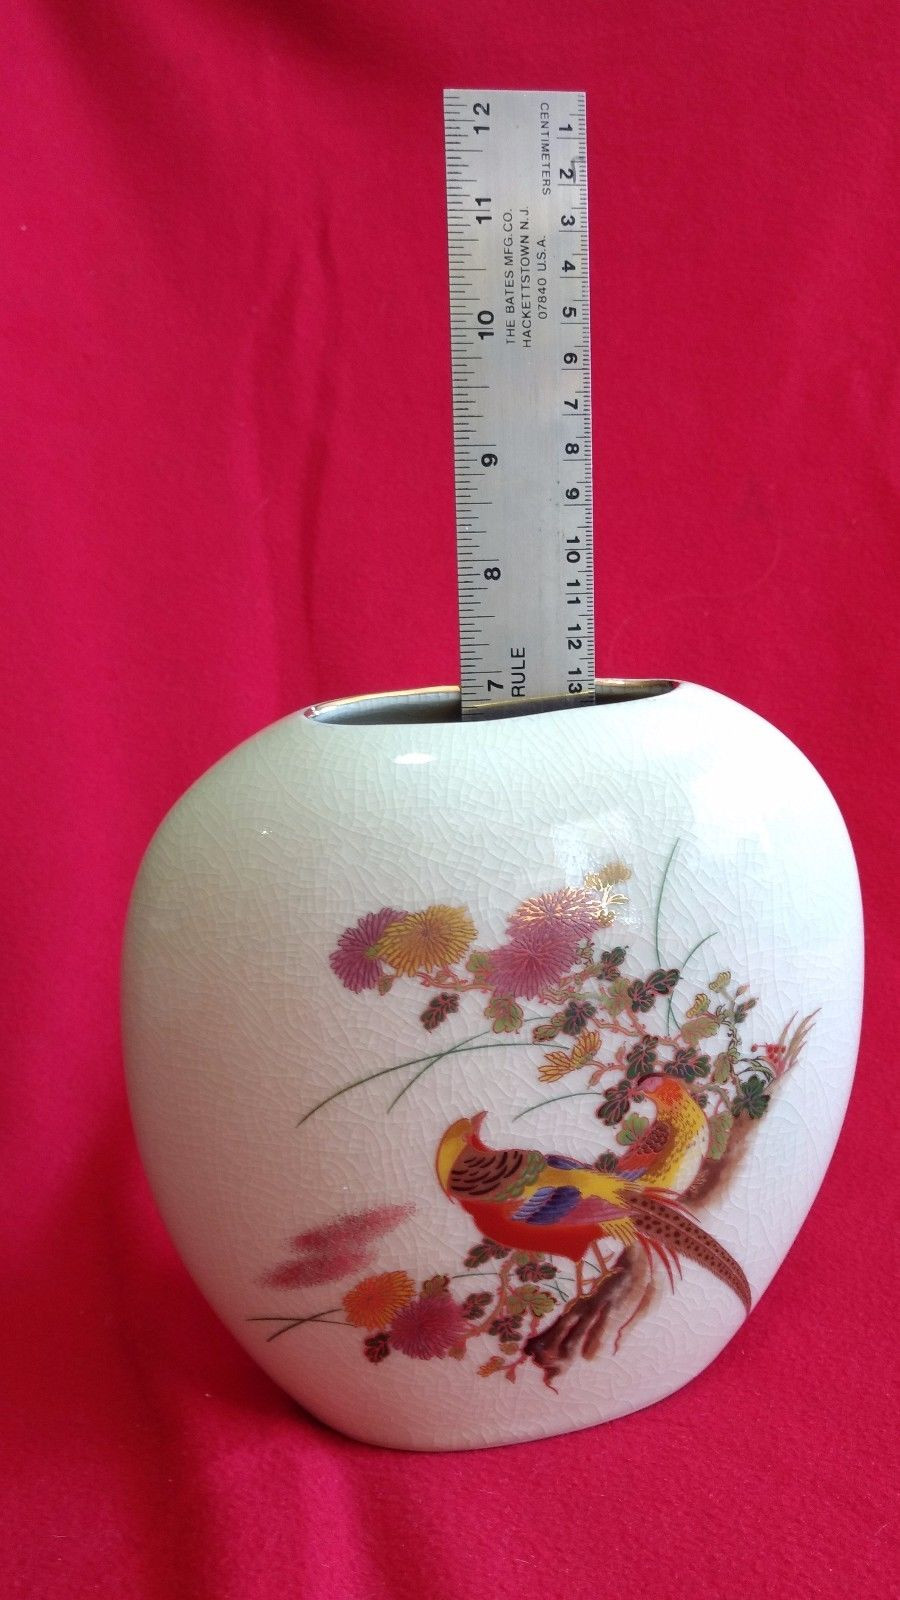 otagiri japan bud vase of the orient inc hand decorated flower vase made in japan 12 00 in the orient inc hand decorated flower vase made in japan 1 of 5only 1 available see more